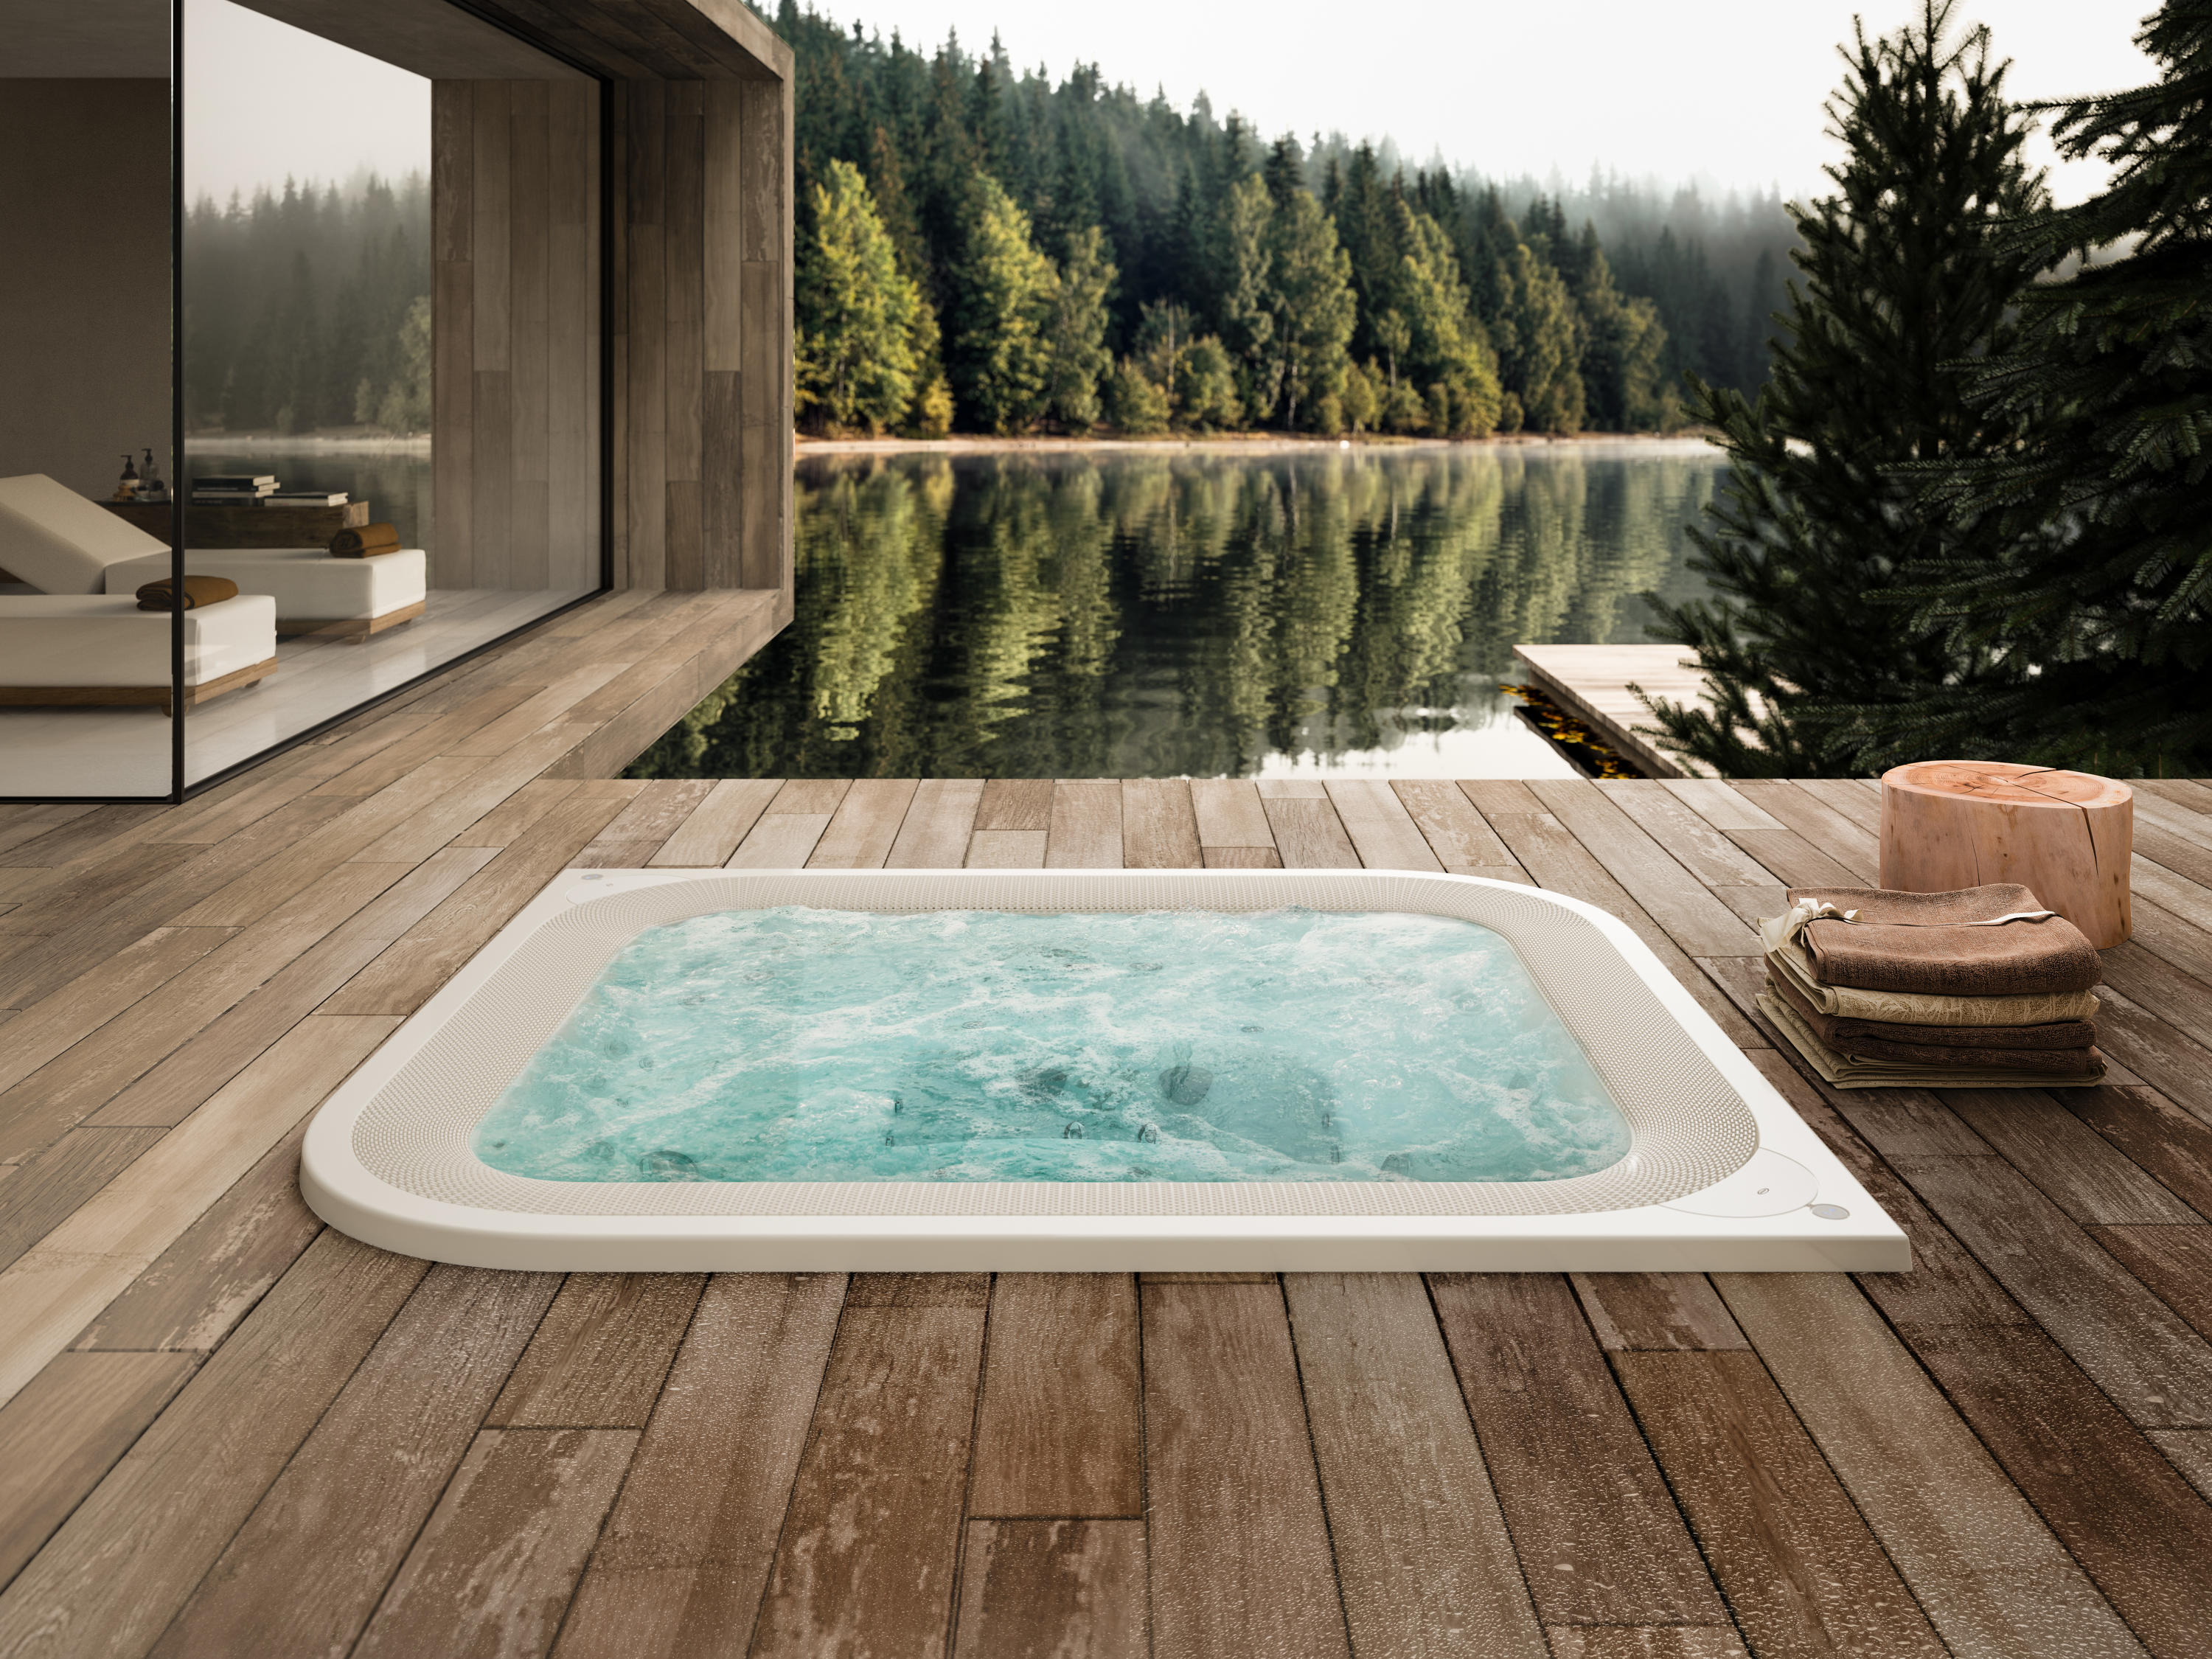 spannend zege echtgenoot All whirlpools are not the same: Jacuzzi®